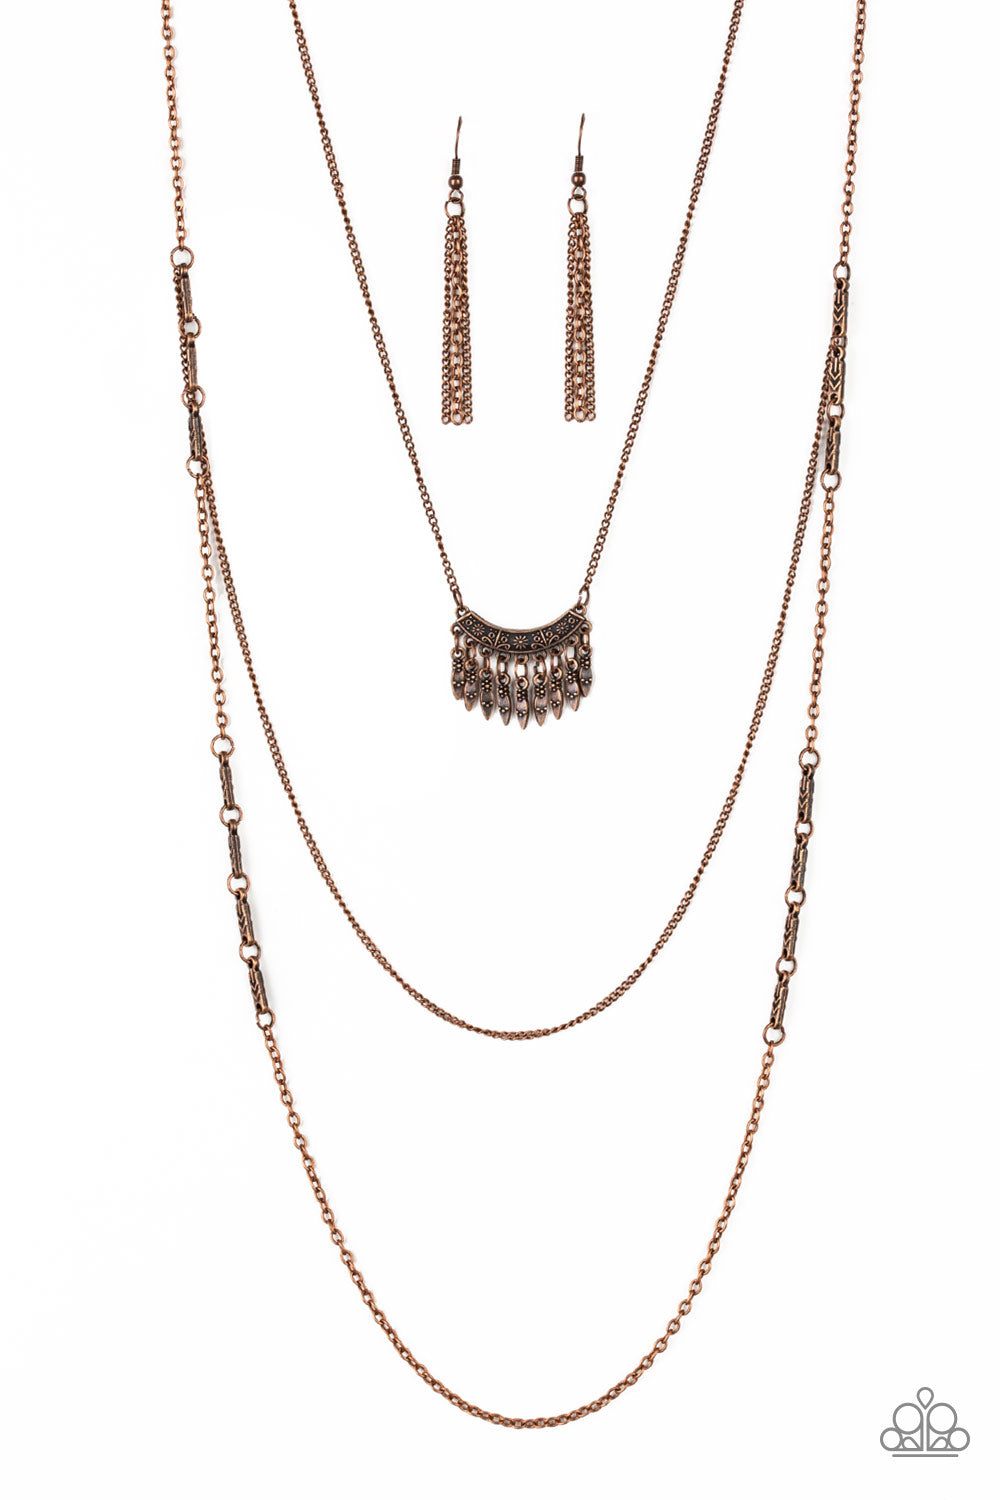 Homestead Harvest Paparazzi Accessories Necklace with Earrings - Copper